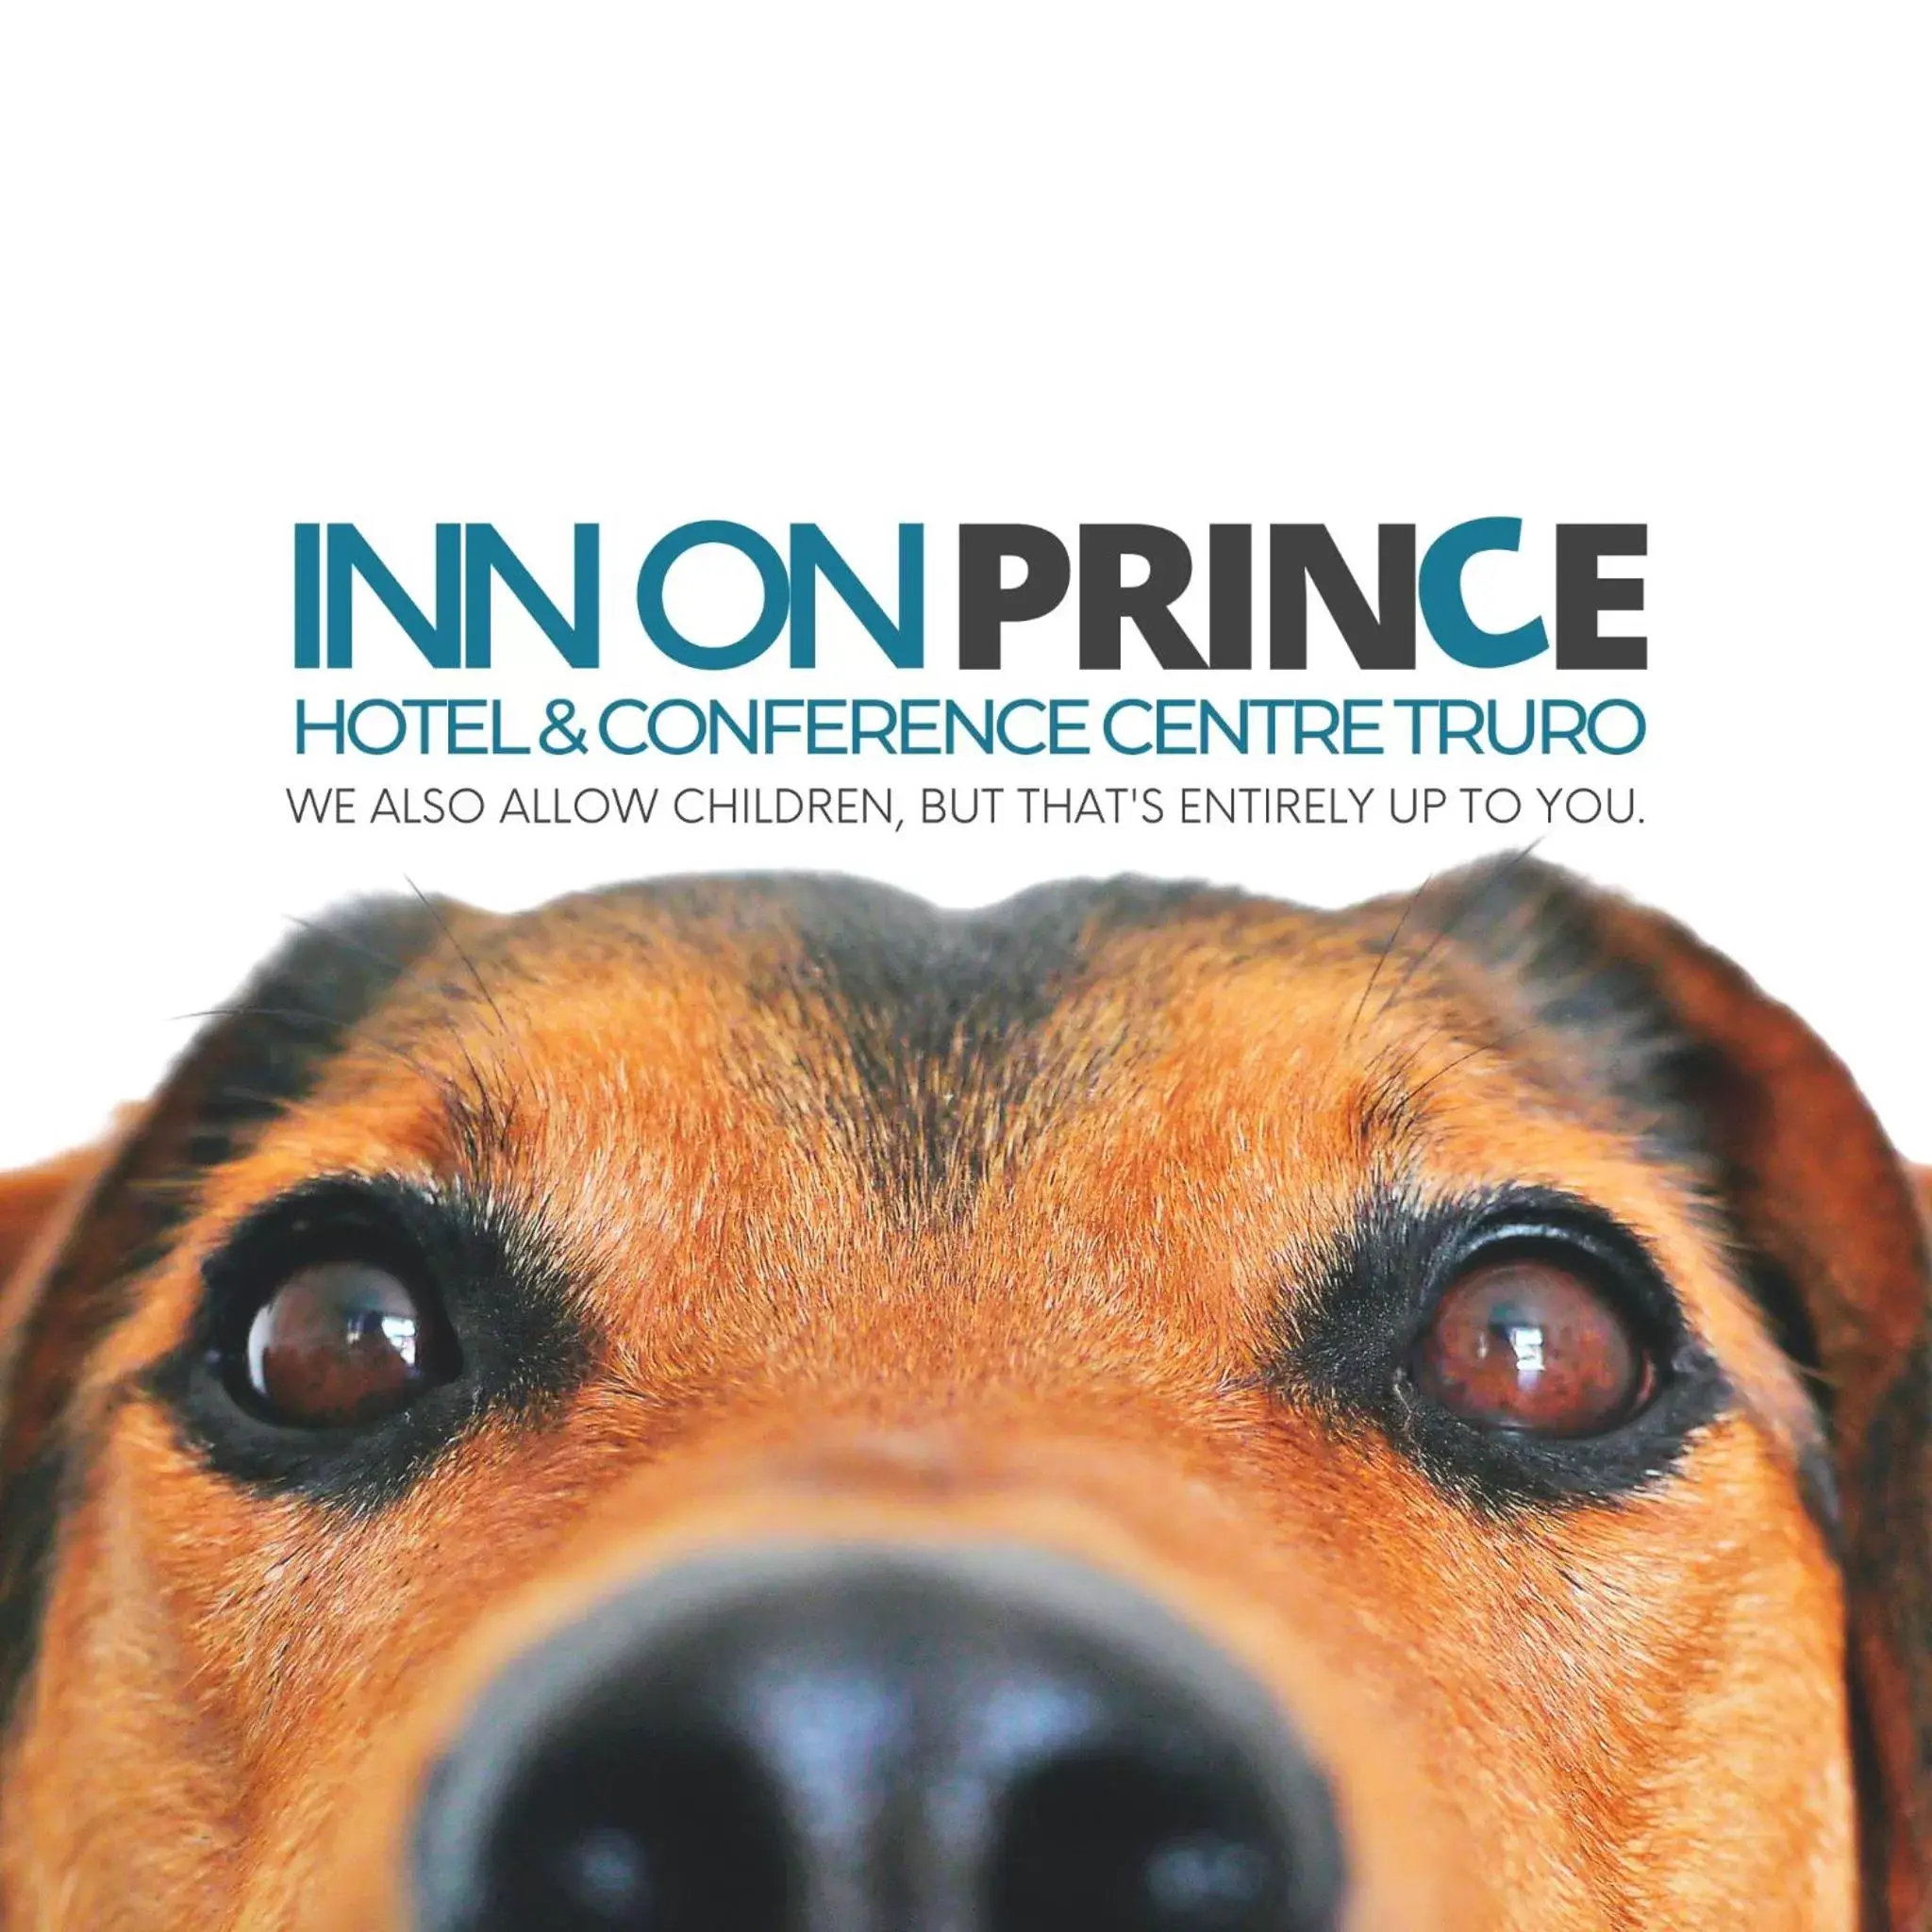 Pets in Inn on Prince Hotel and Conference Centre Truro